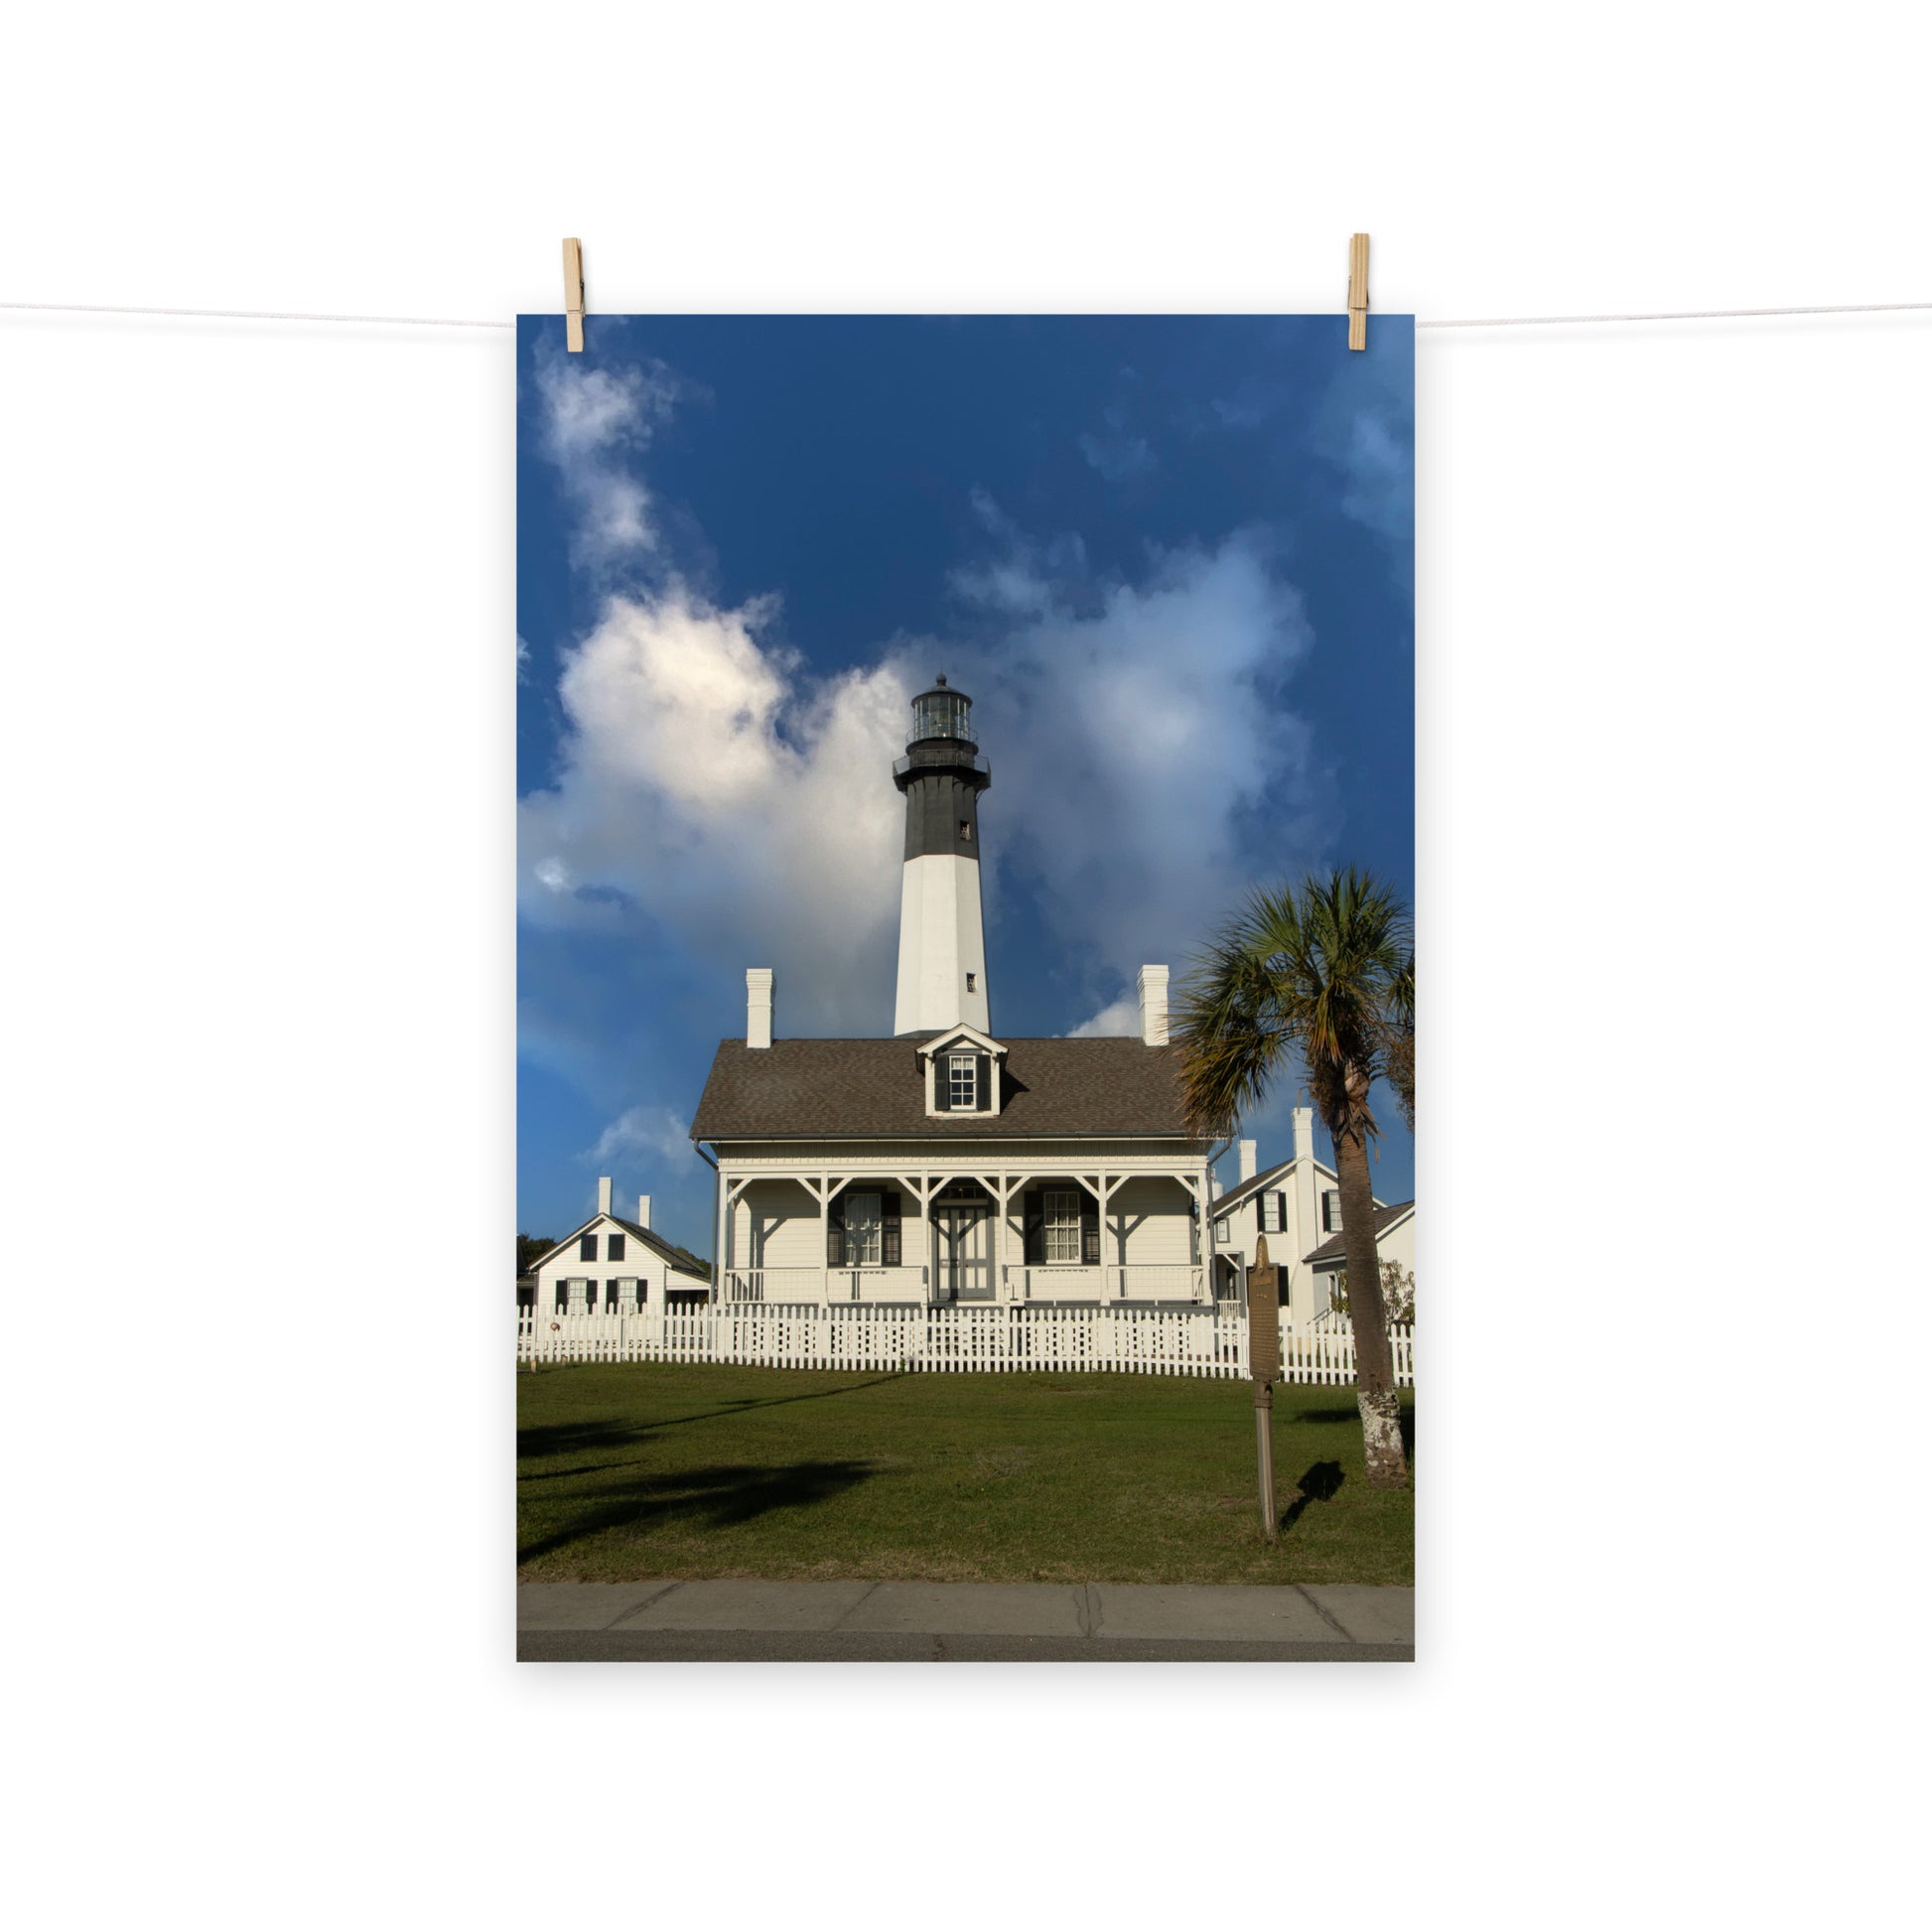 Architectural / Industrial / Maritime / Nautical / Decor Tybee Island Lighthouse Loose Wall Art Print 8" x 10"